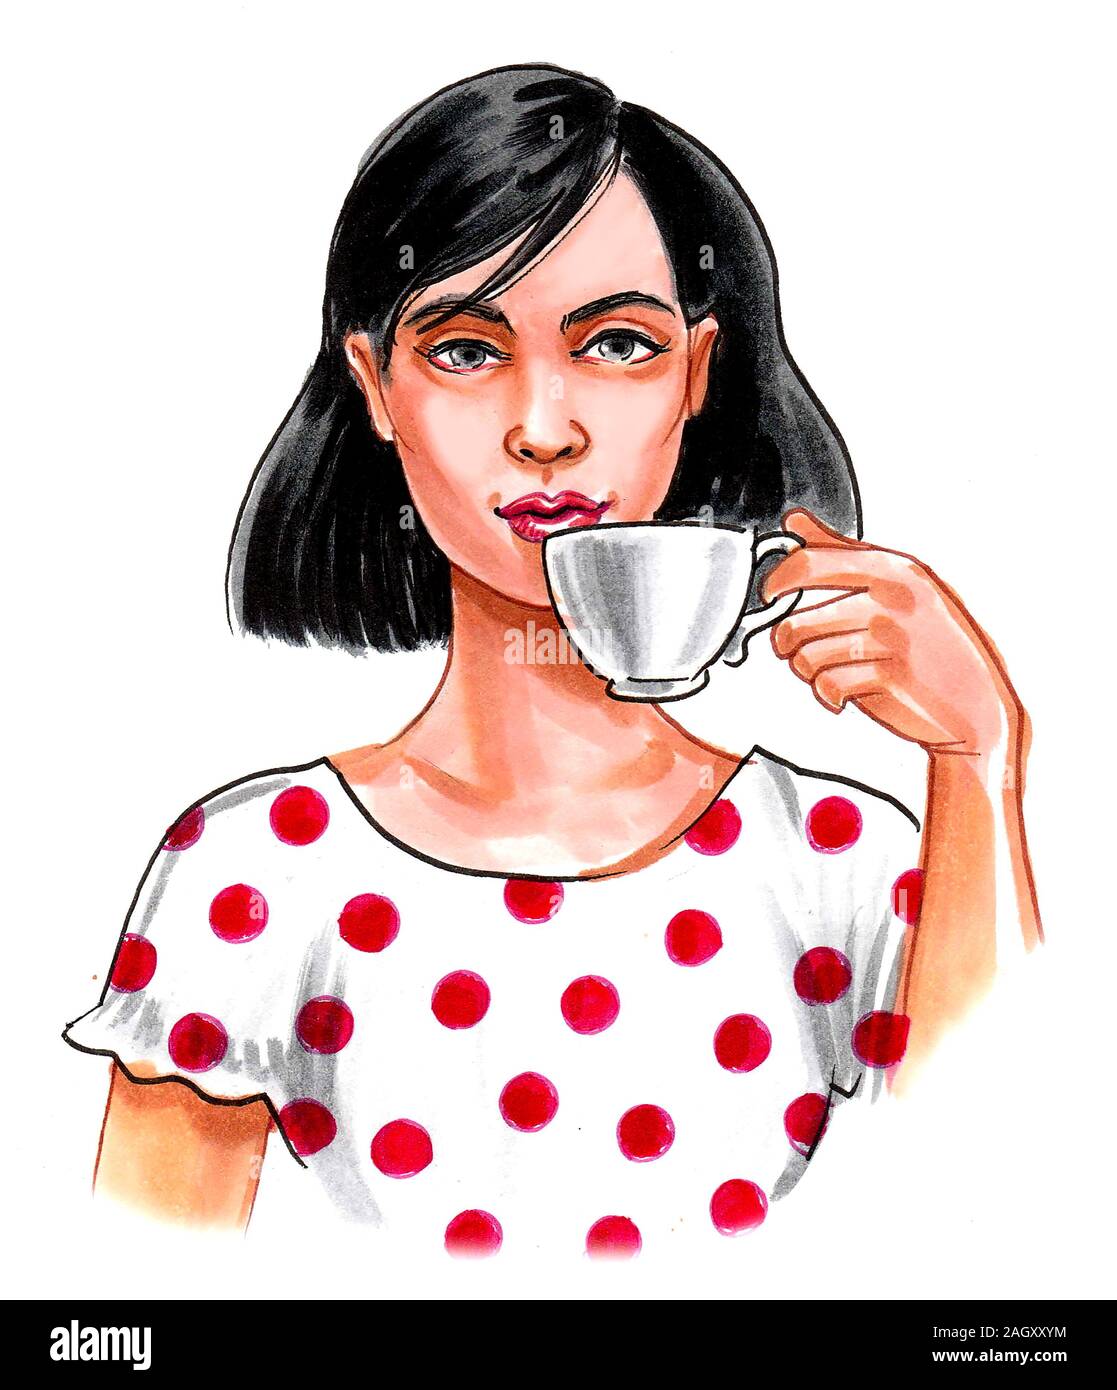 https://c8.alamy.com/comp/2AGXXYM/pretty-woman-drinking-a-cup-of-tea-ink-and-watercolor-illustration-2AGXXYM.jpg